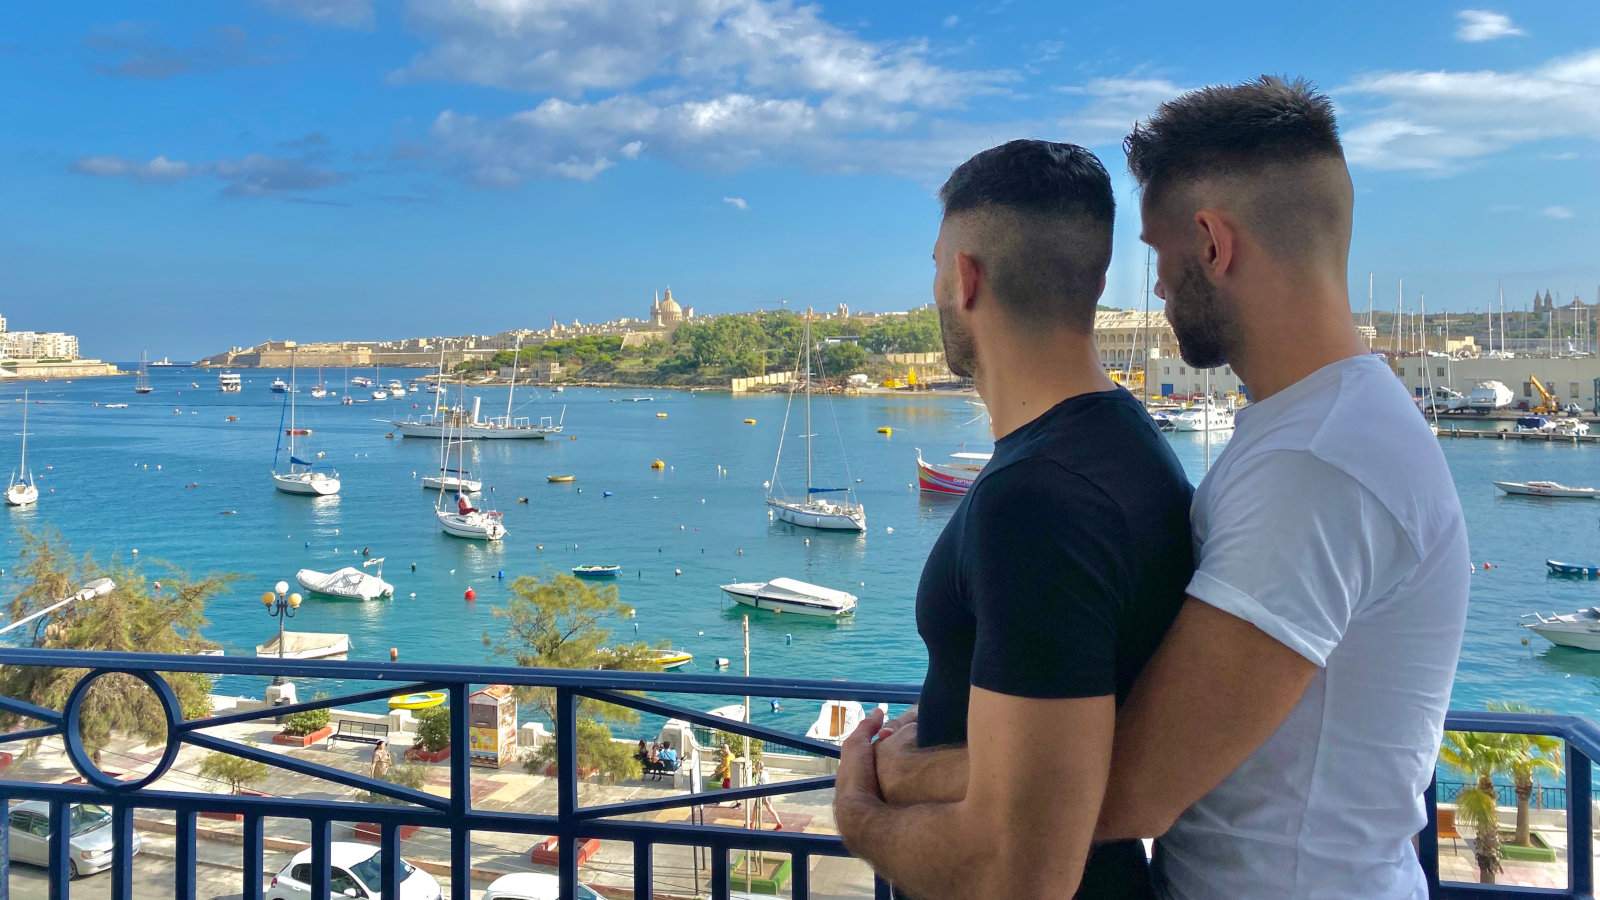 The Waterfront Hotel is an affordable and gay friendly choice of accommodation in Malta with beautiful views over the Valletta Harbour